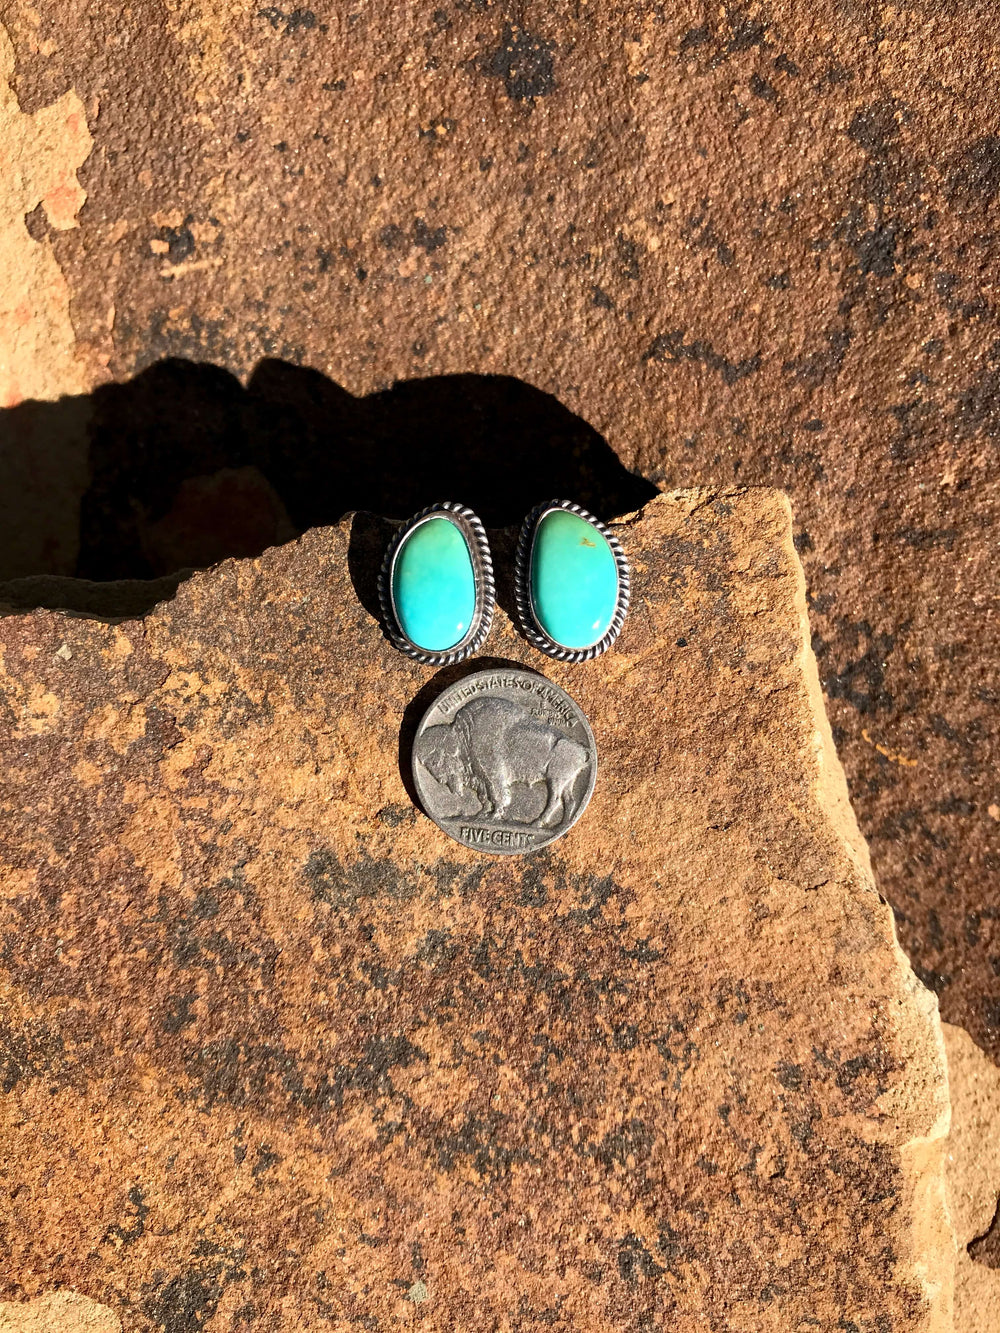 The Turquoise Studs, 13-Earrings-Calli Co., Turquoise and Silver Jewelry, Native American Handmade, Zuni Tribe, Navajo Tribe, Brock Texas